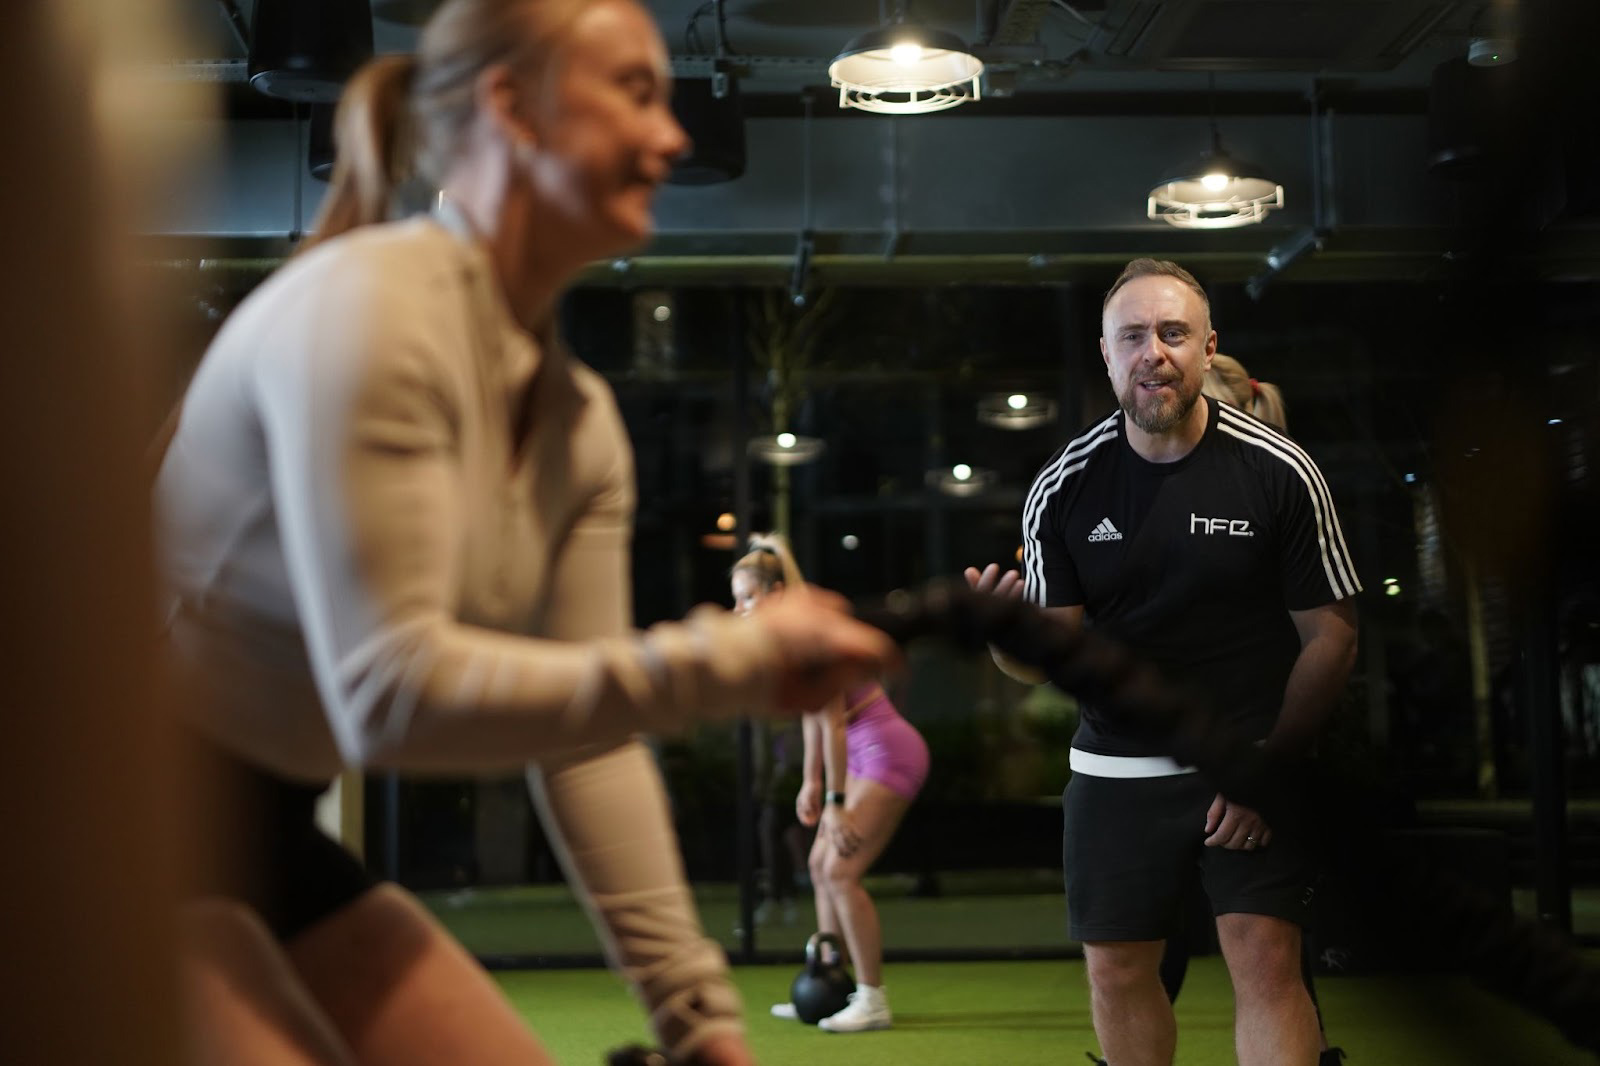 How to find the right personal training course